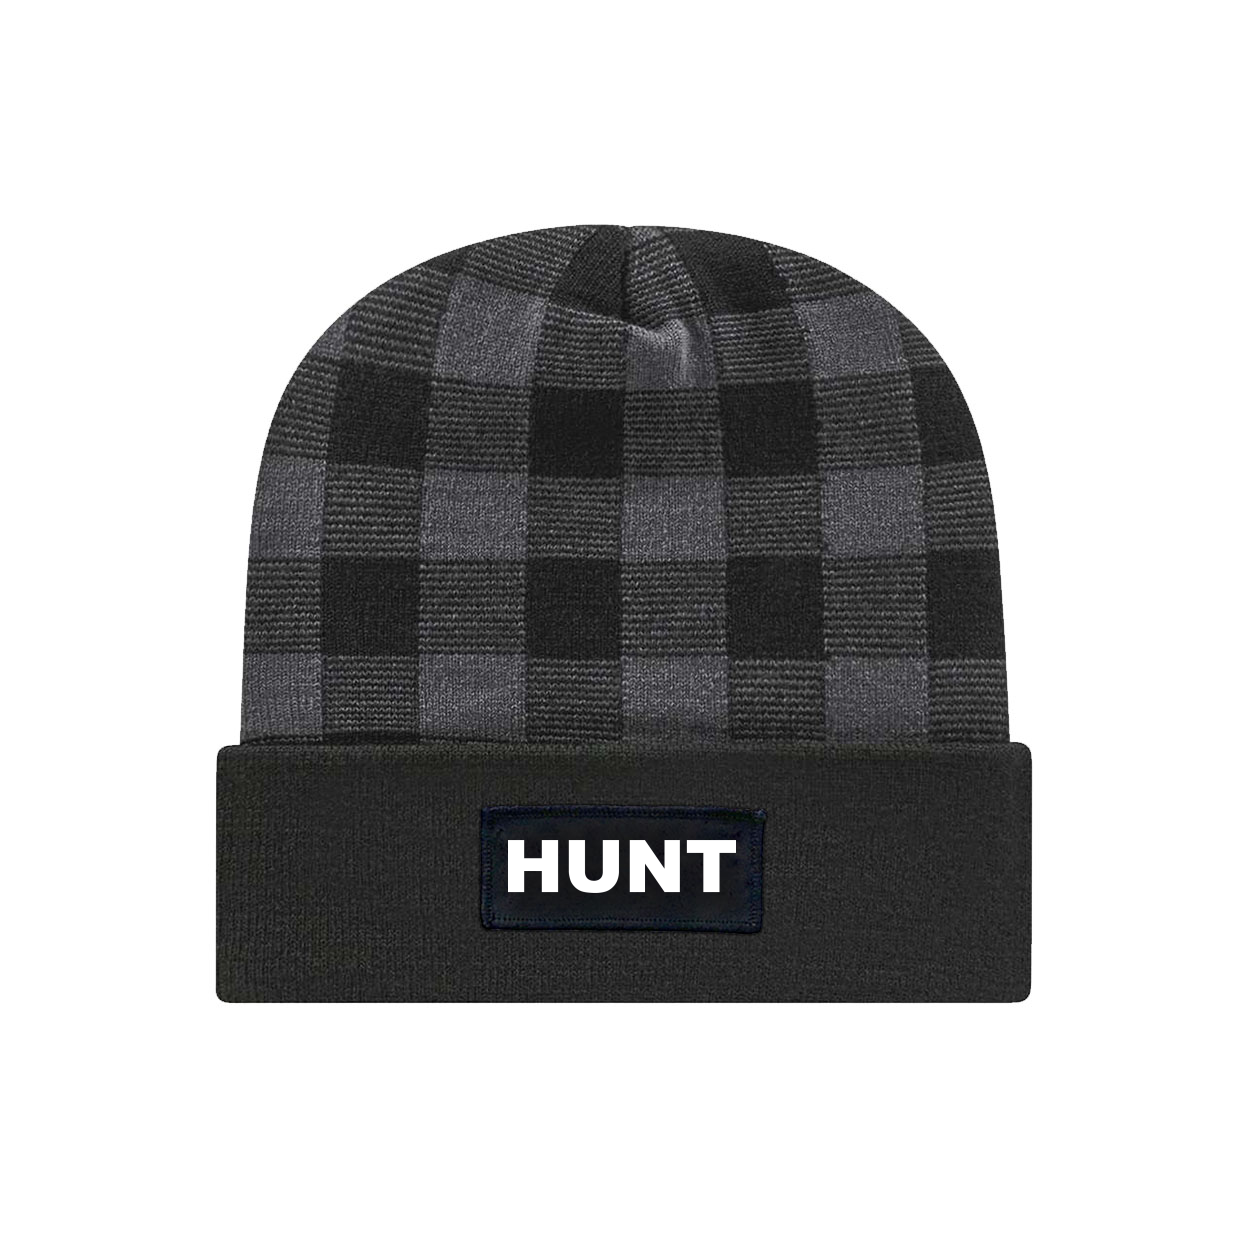 Hunt Brand Logo Night Out Woven Patch Roll Up Plaid Beanie Black/Heather Gray